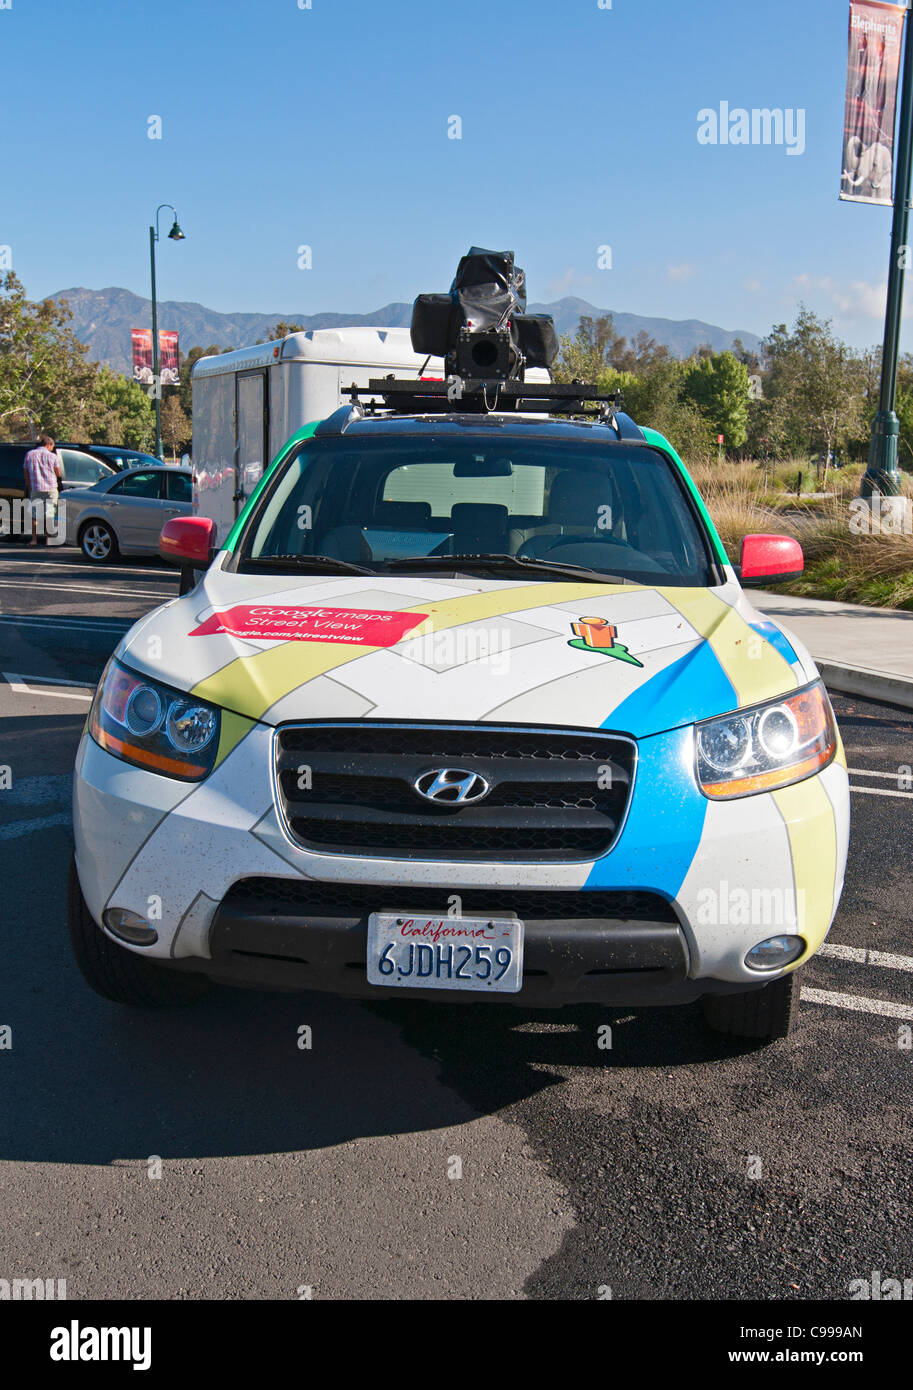 Google vehicle with camera attached to photograph images used in Street View maps. Stock Photo